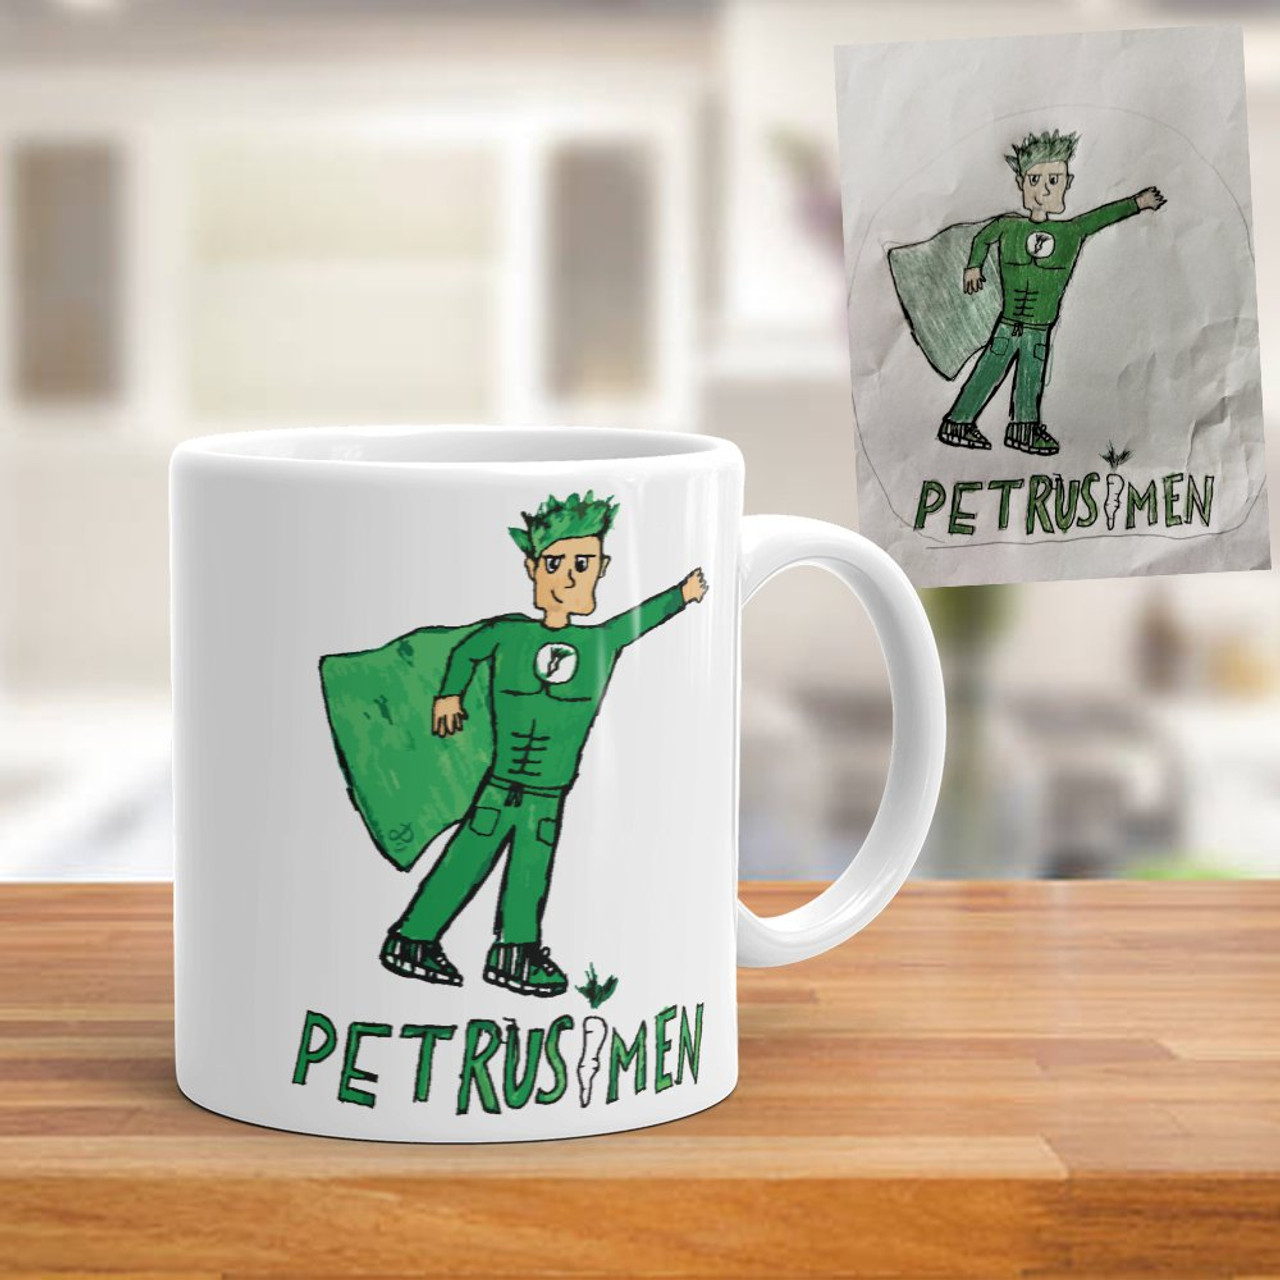 https://cdn11.bigcommerce.com/s-o16h1yivlu/images/stencil/1280x1280/products/180/691/Personalized-mug-kids-drawing__27389.1621714337.jpg?c=1